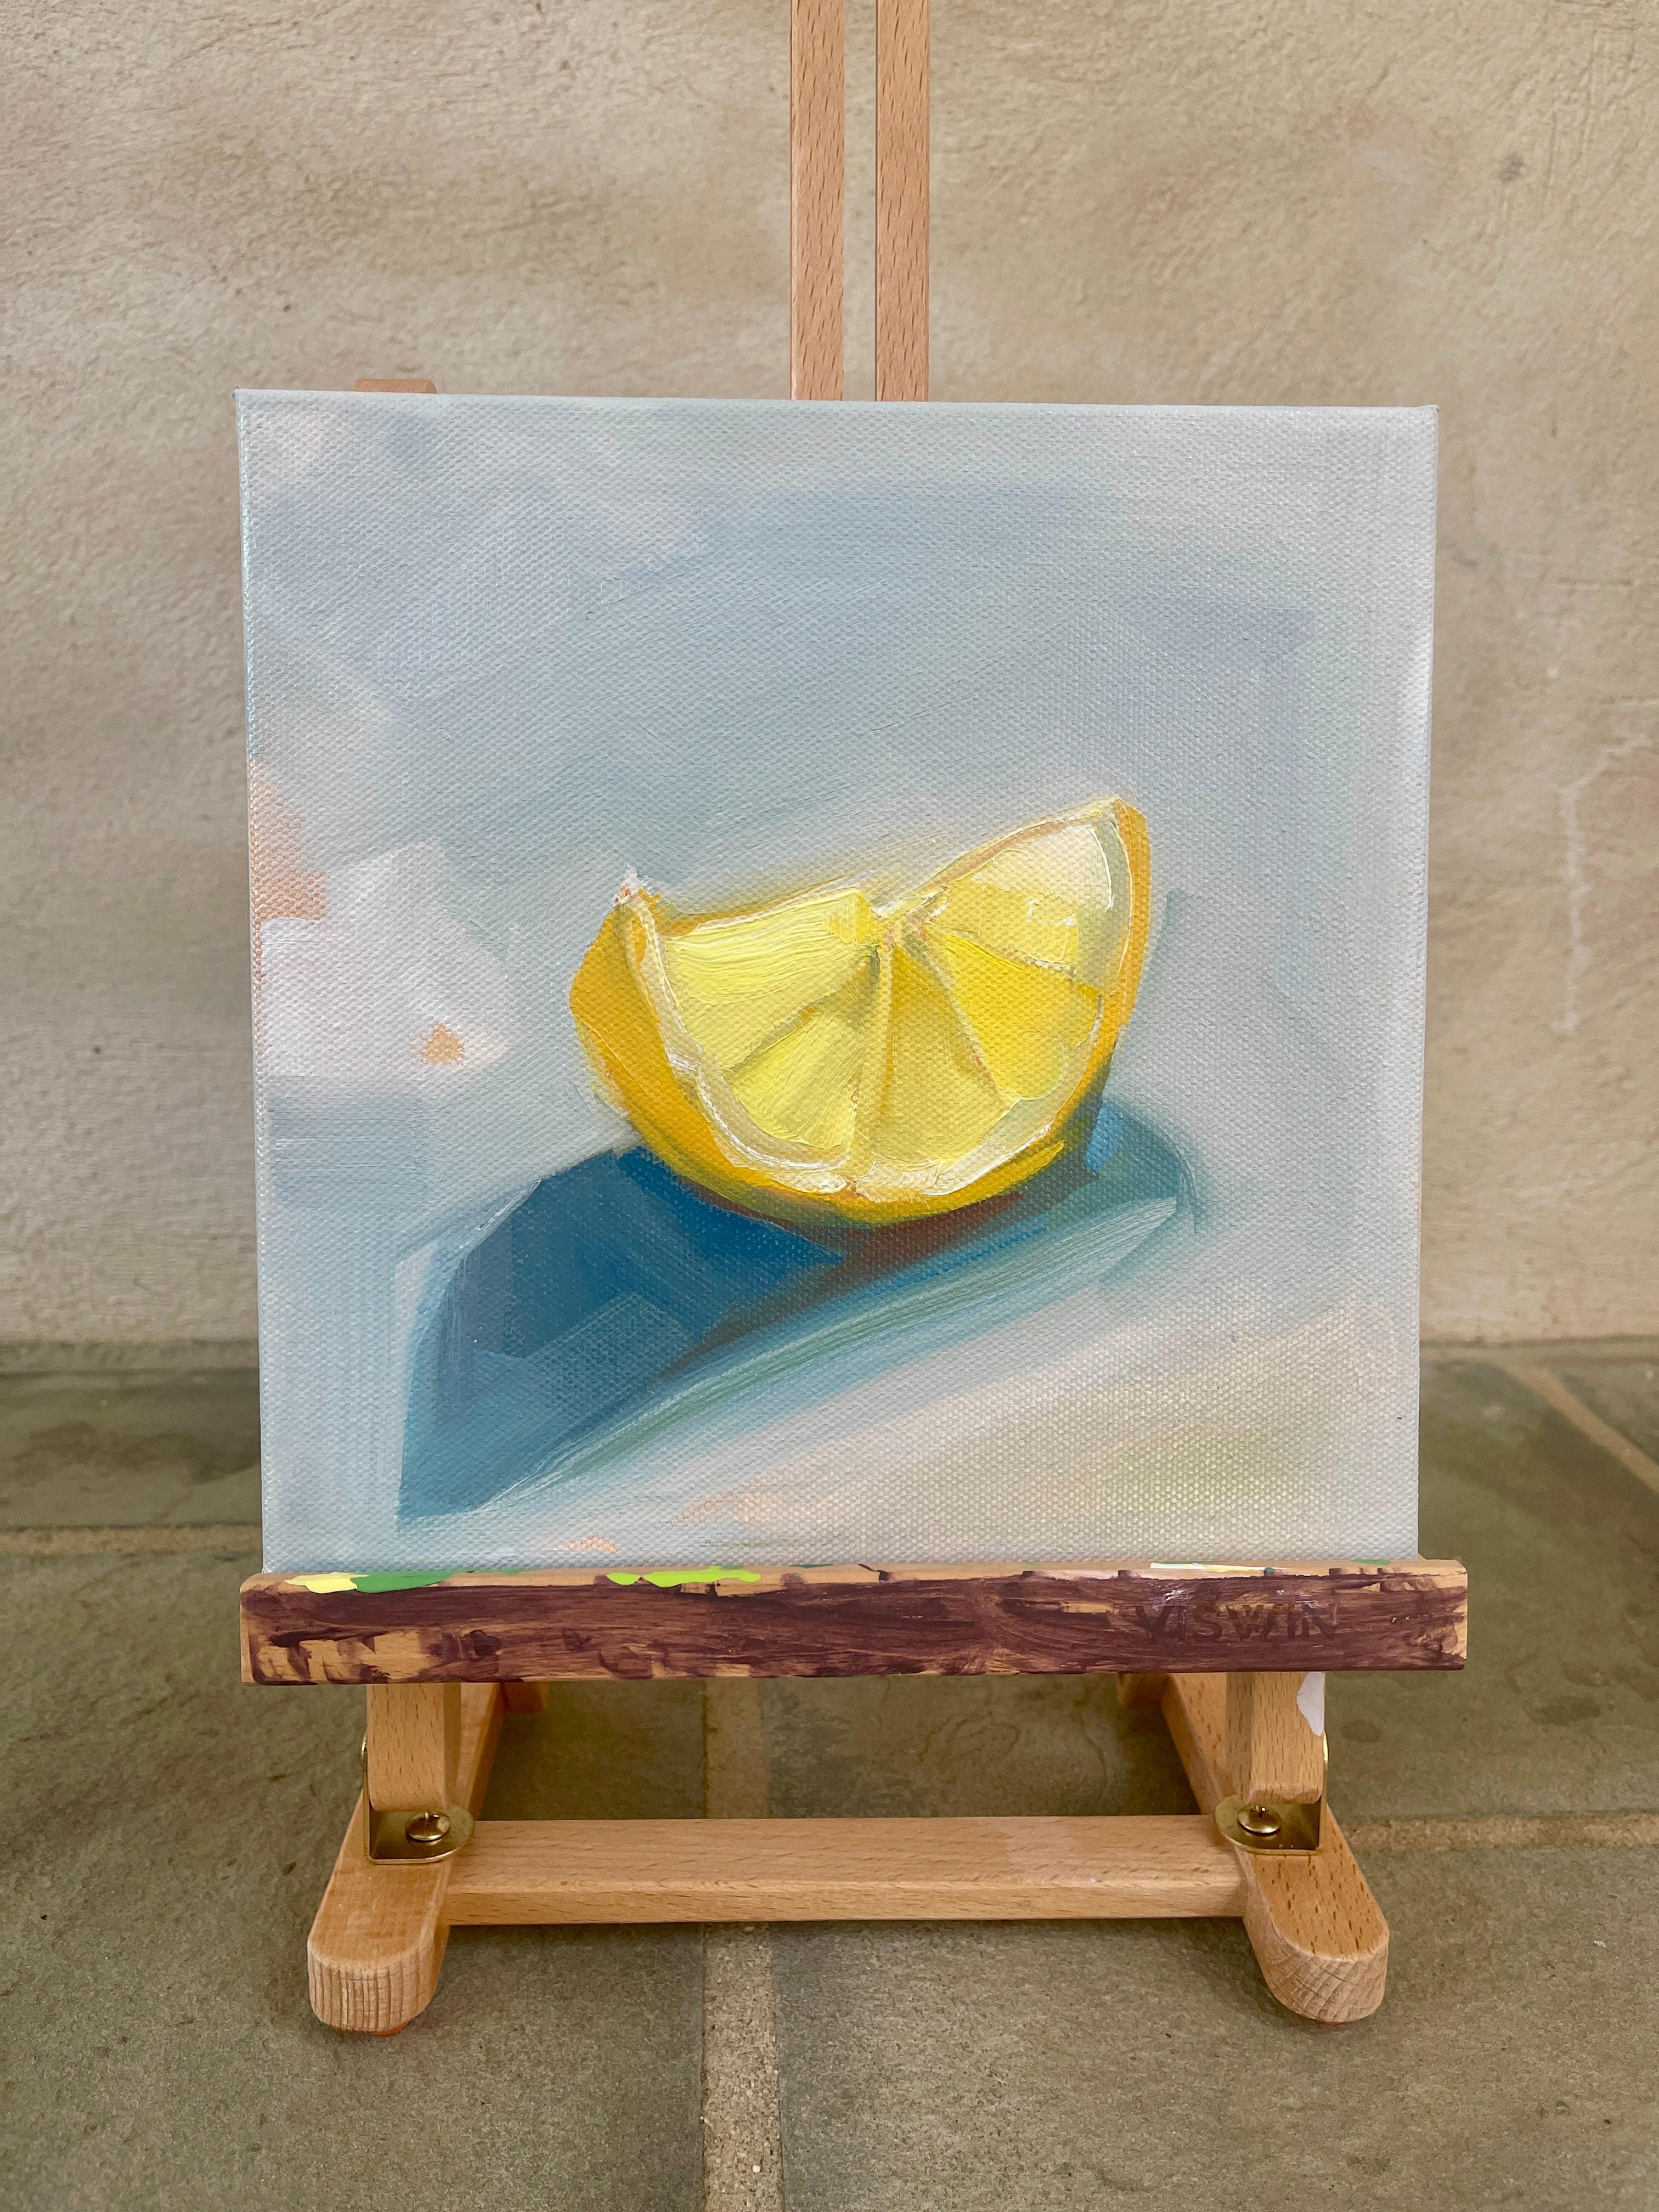 <p>Artist Comments<br>A vibrant citrus wedge basks in the morning light. While slicing a lemon, the glossy pulp and the shadow beneath the fruit captivates artist Malia Pettit. The sudden burst of inspiration compels her to quickly capture the